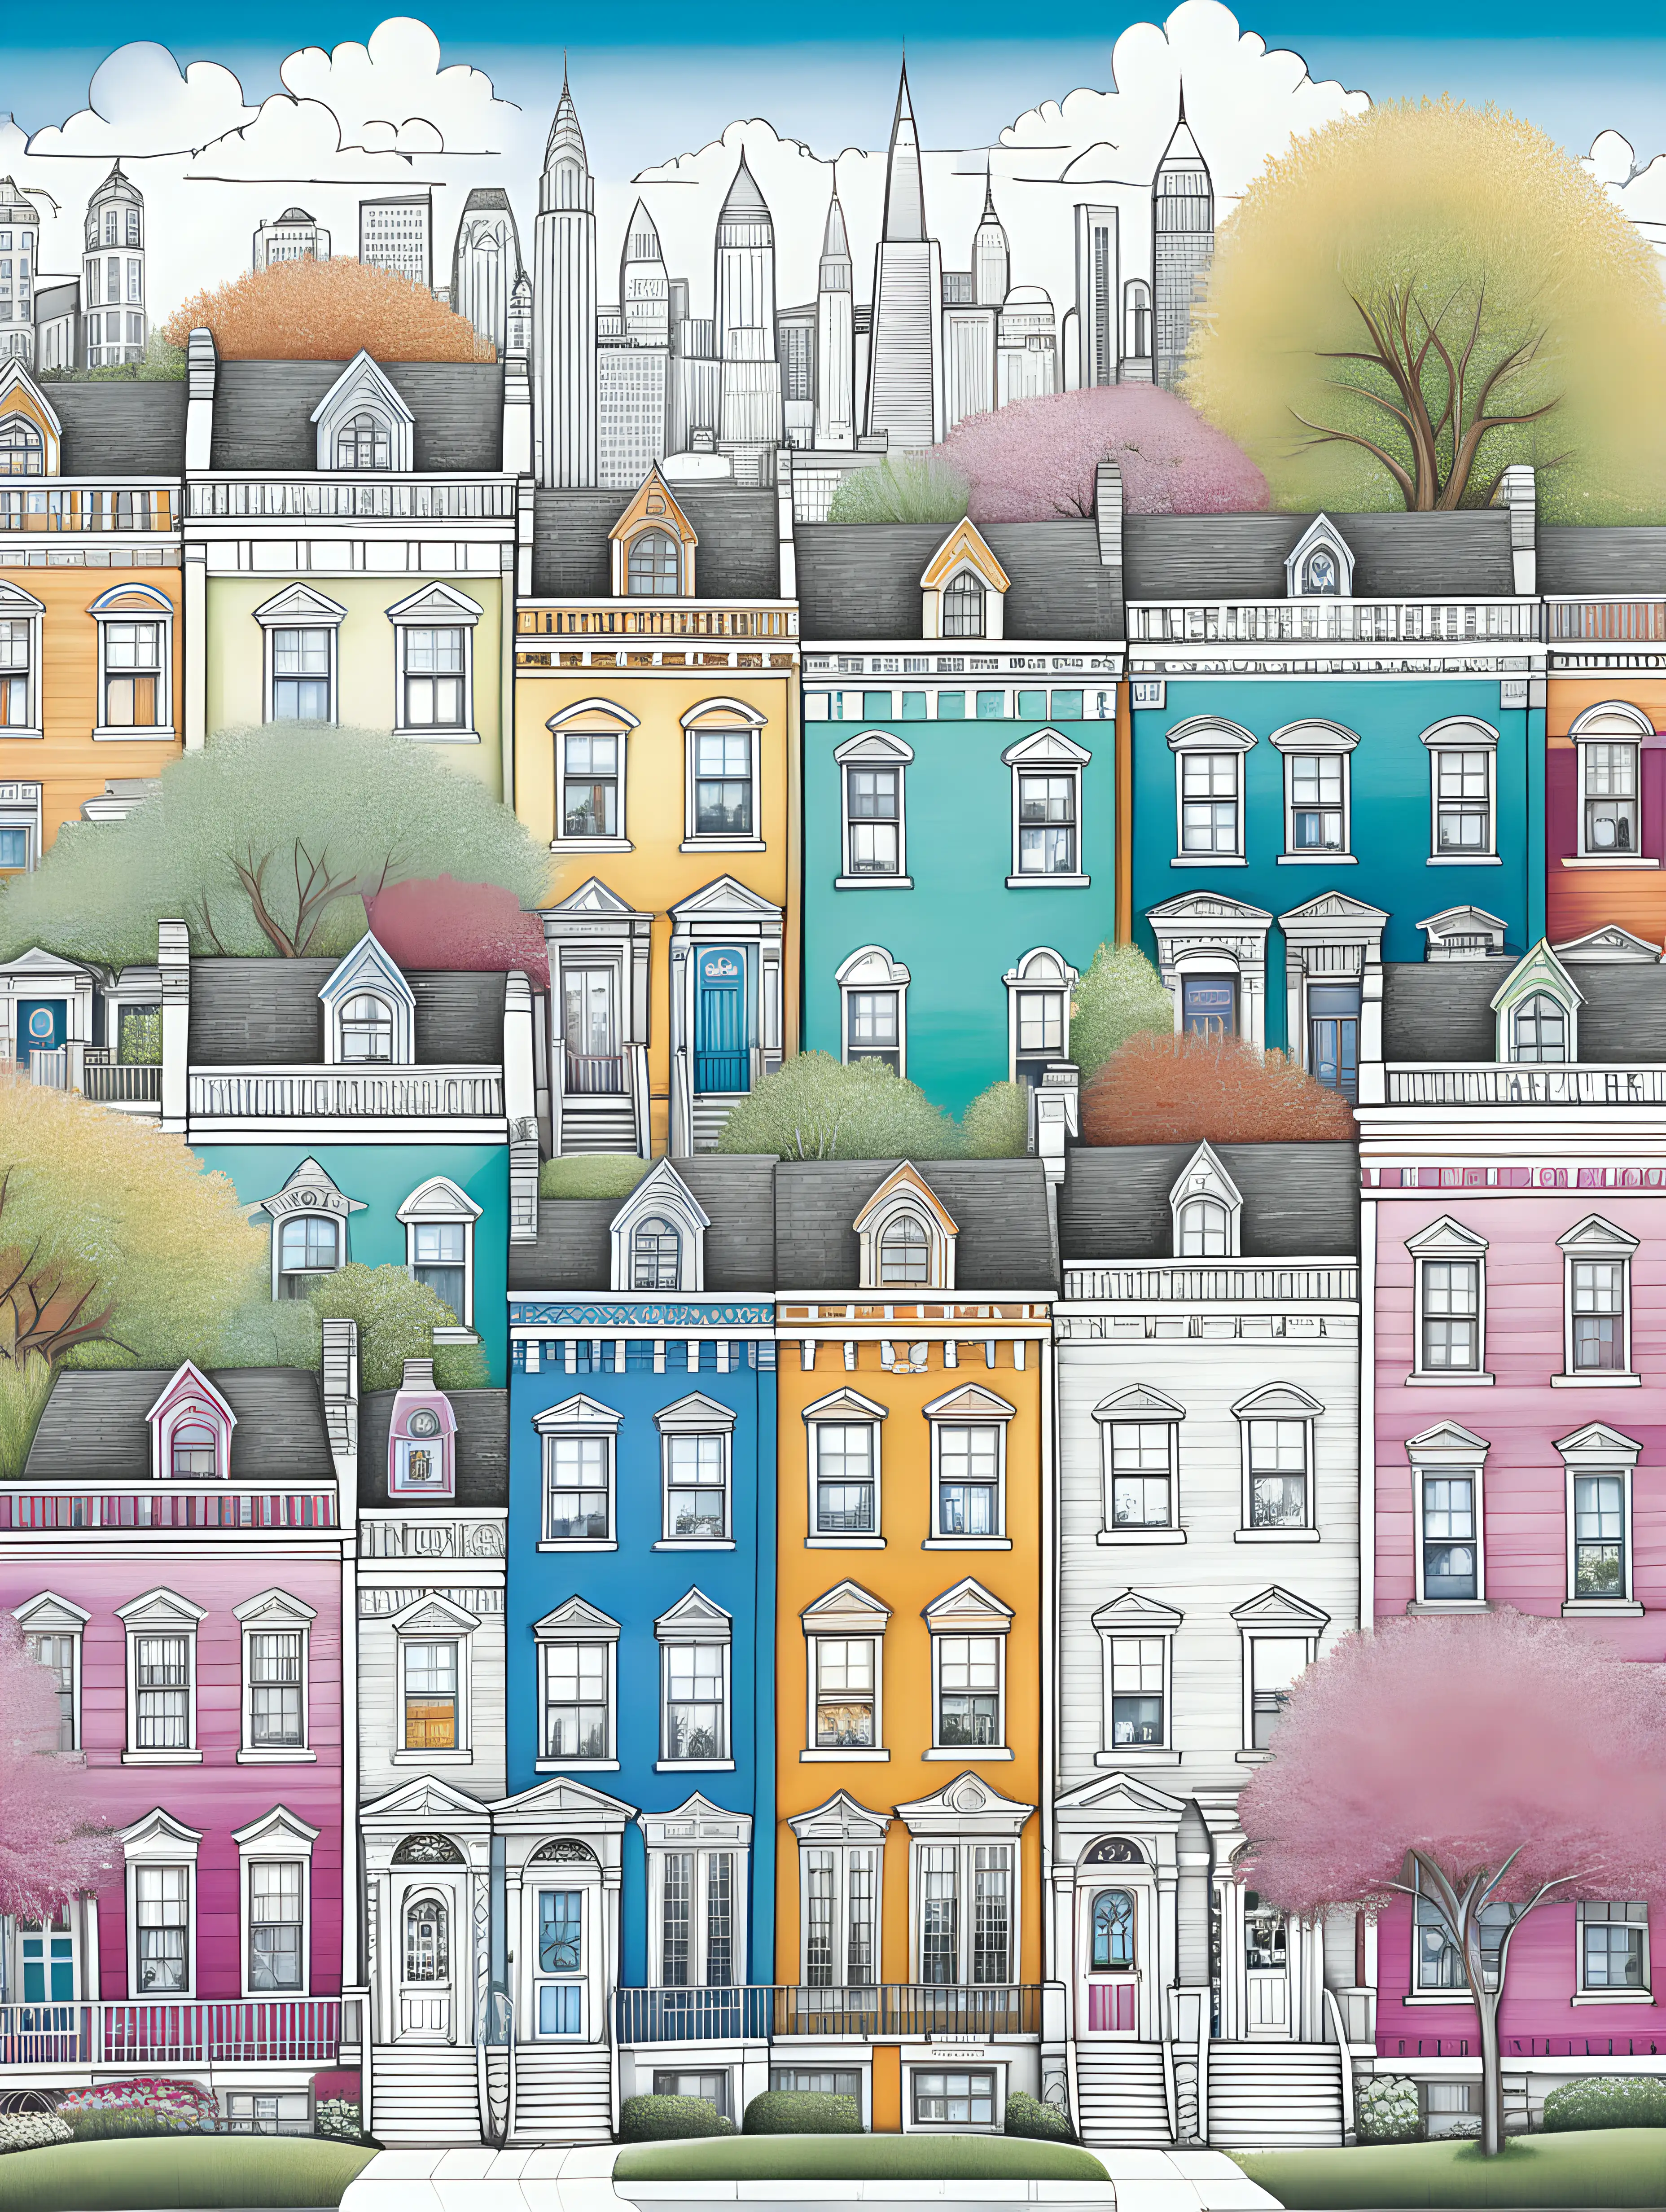 illustrated cover for a coloring book, colored in realistic and playful colors, city townhouses aligned horizontally with perfect symmetry, each a unique color pattern, pretty trees and flowers line the block, Above is a playful sky and city skyline, image serves as the perfect wrap for a whimsical coloring book for young adults, clean lines for makes sharp details.